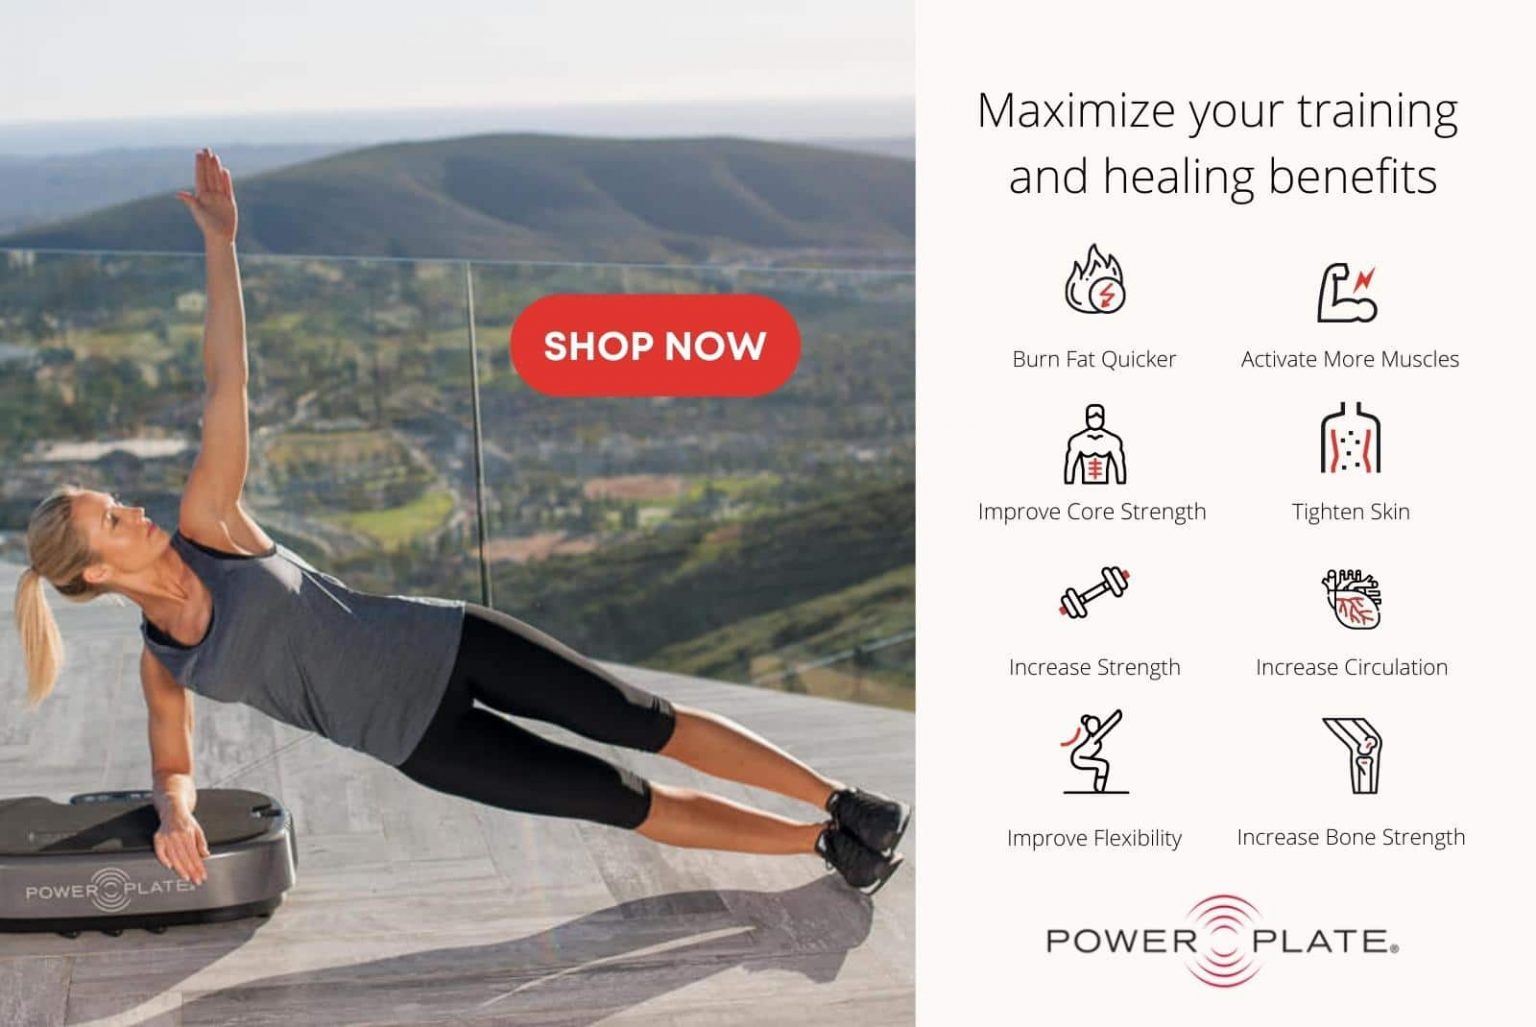 Maximize your training and healing benefits with the Personal Power Plate